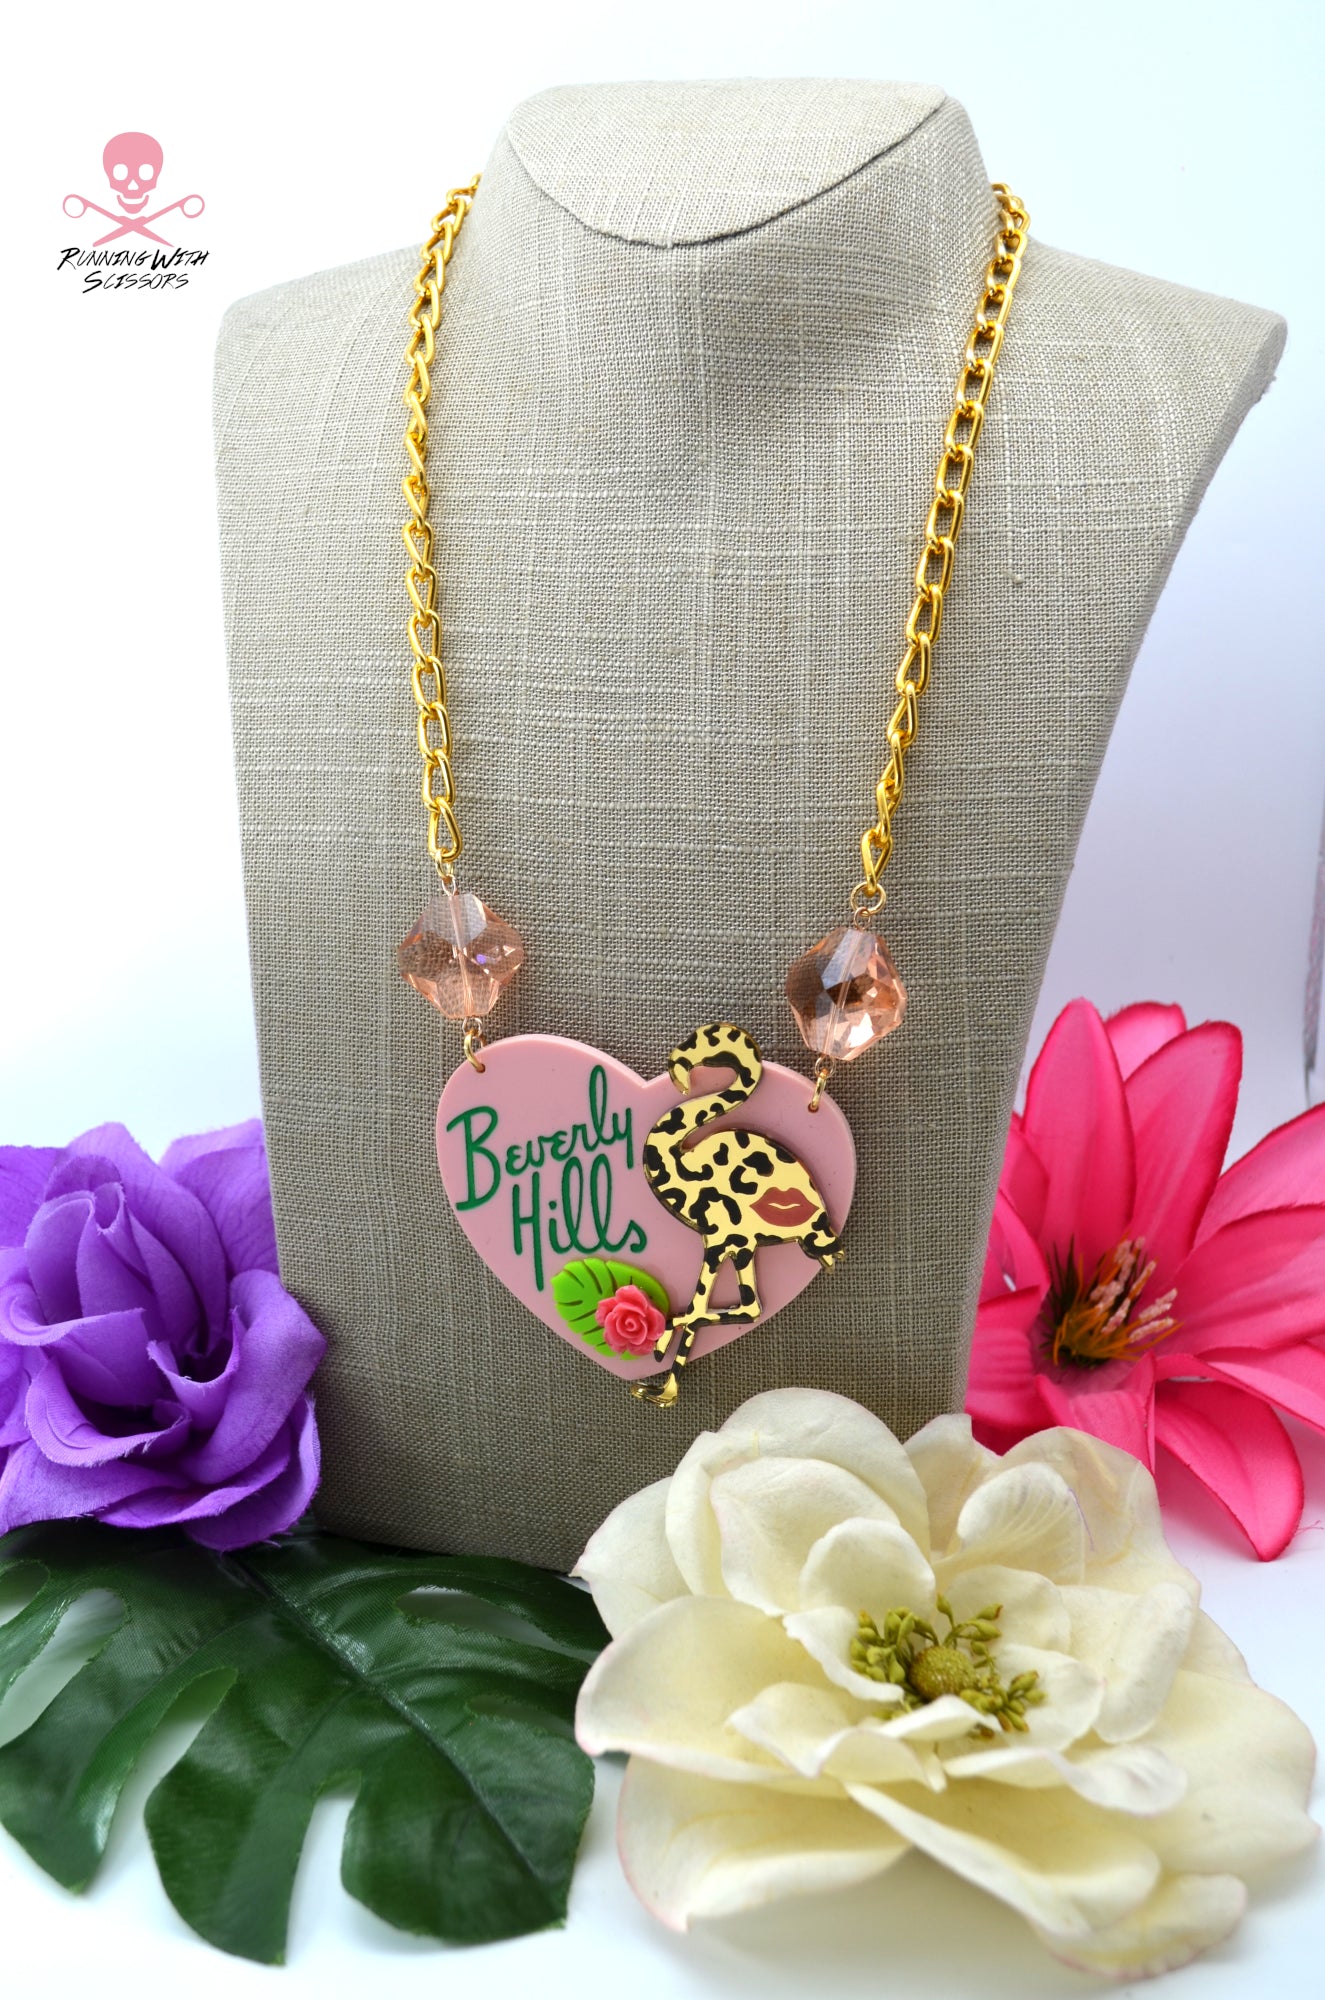 BEVERLY HILLS FLAMINGO Charm Necklace in Laser Cut Acrylic